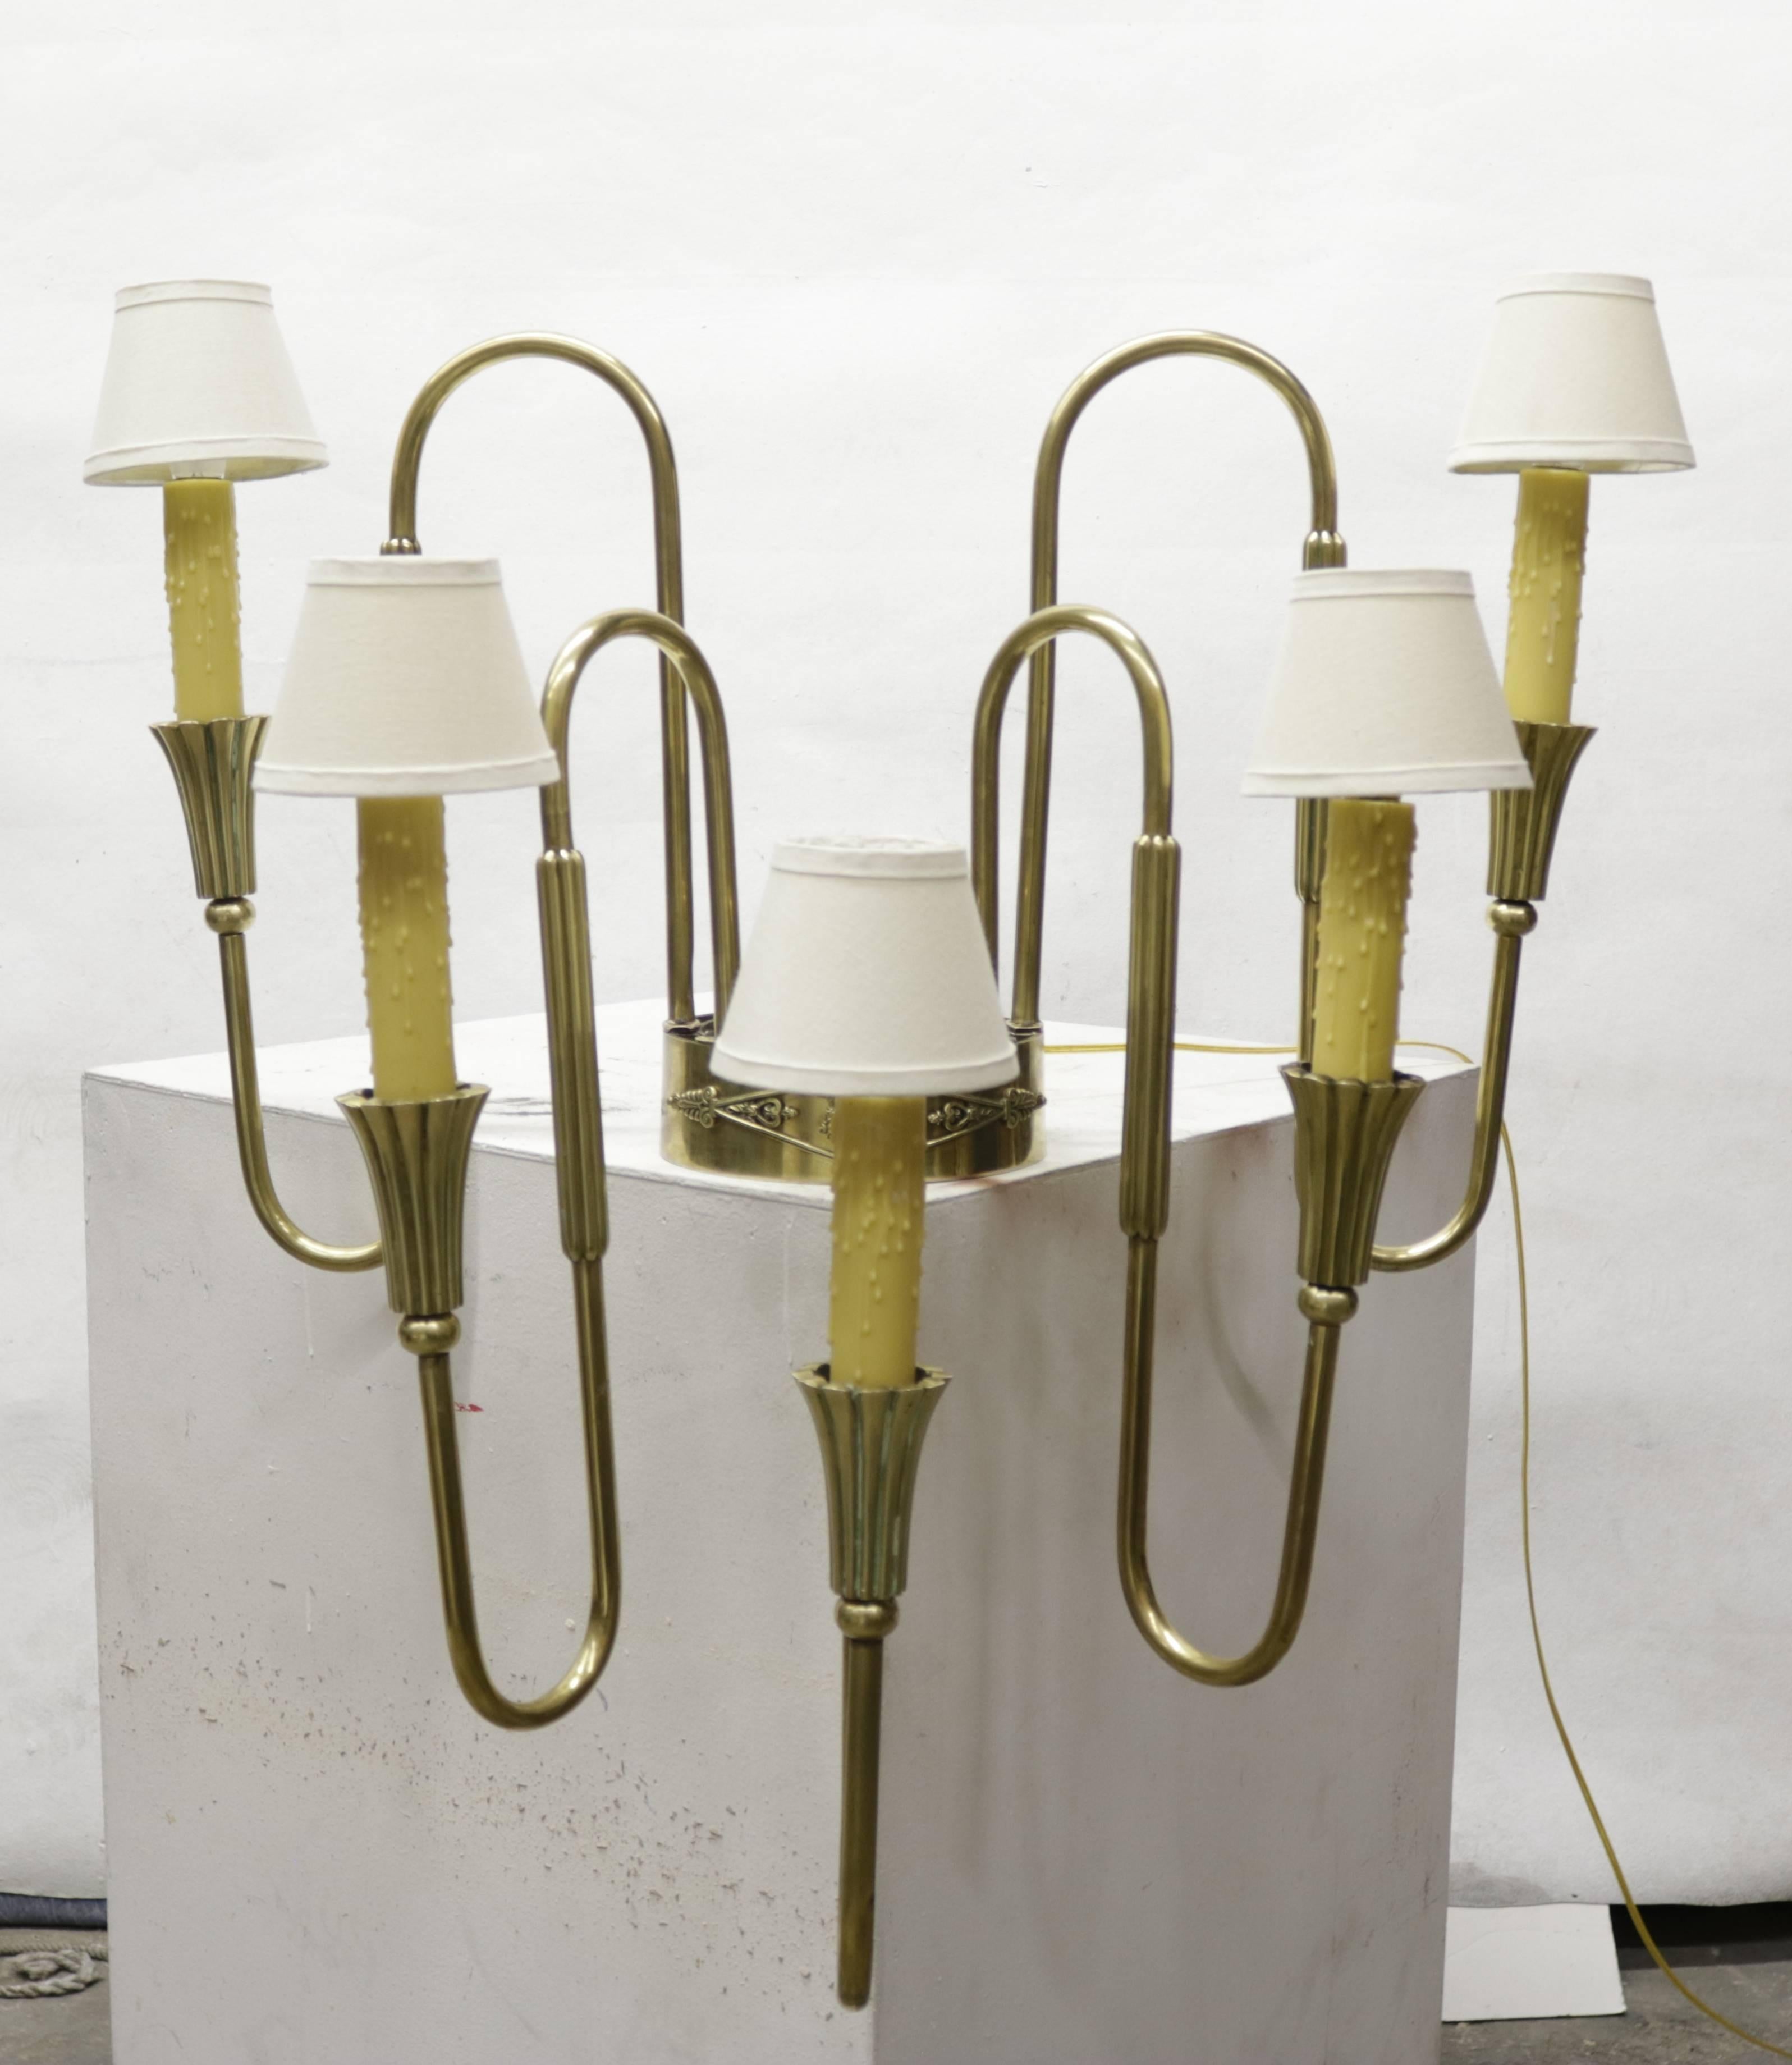 Pair of French Bronze Candelabra Sconces in the 